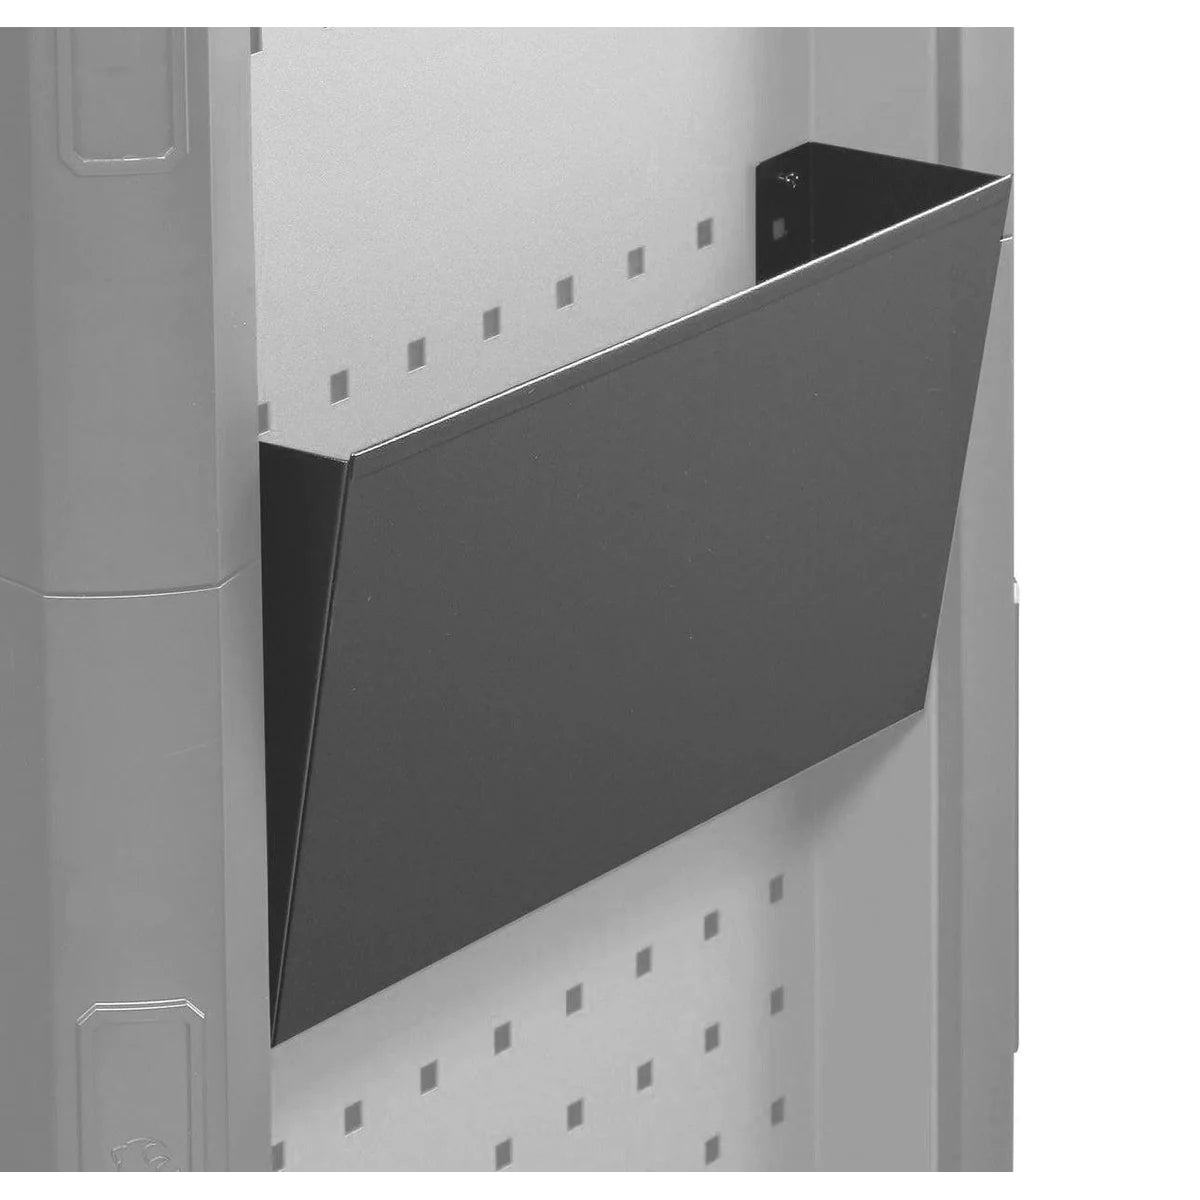 Document Holder, Fits Perforated Wall